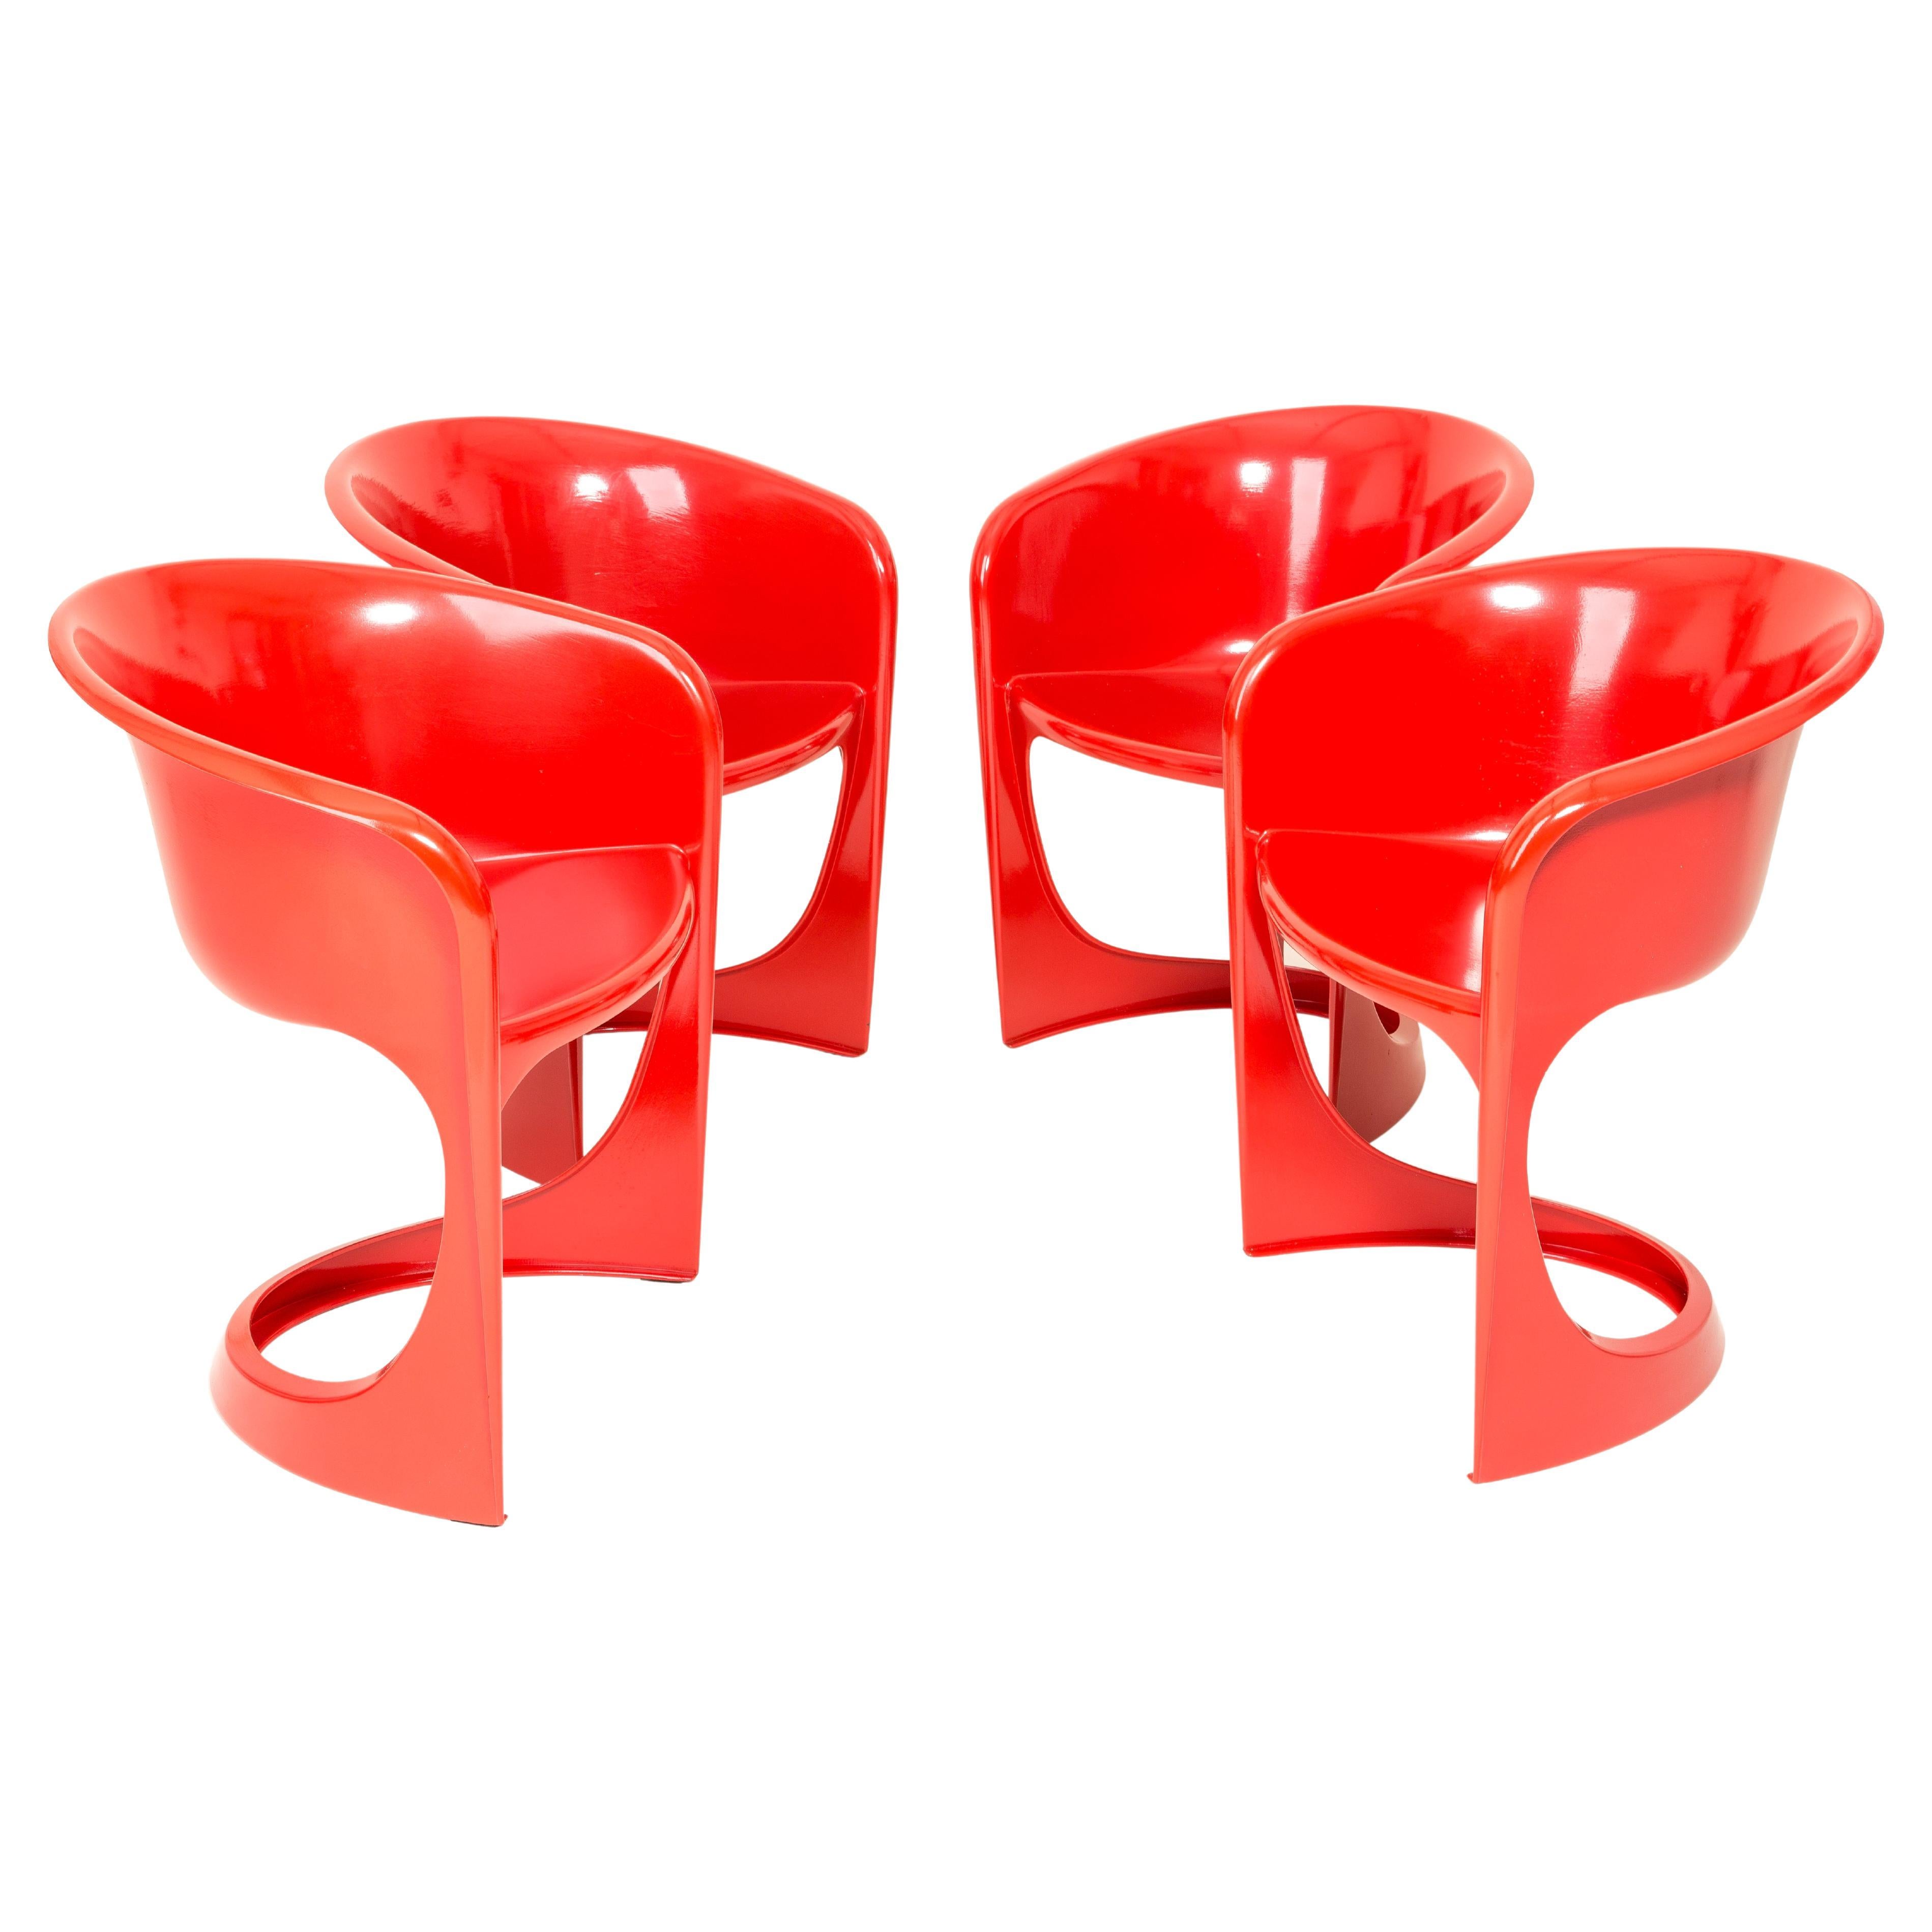 Set of Four Red Cado Chairs, Steen Østergaard, 1974